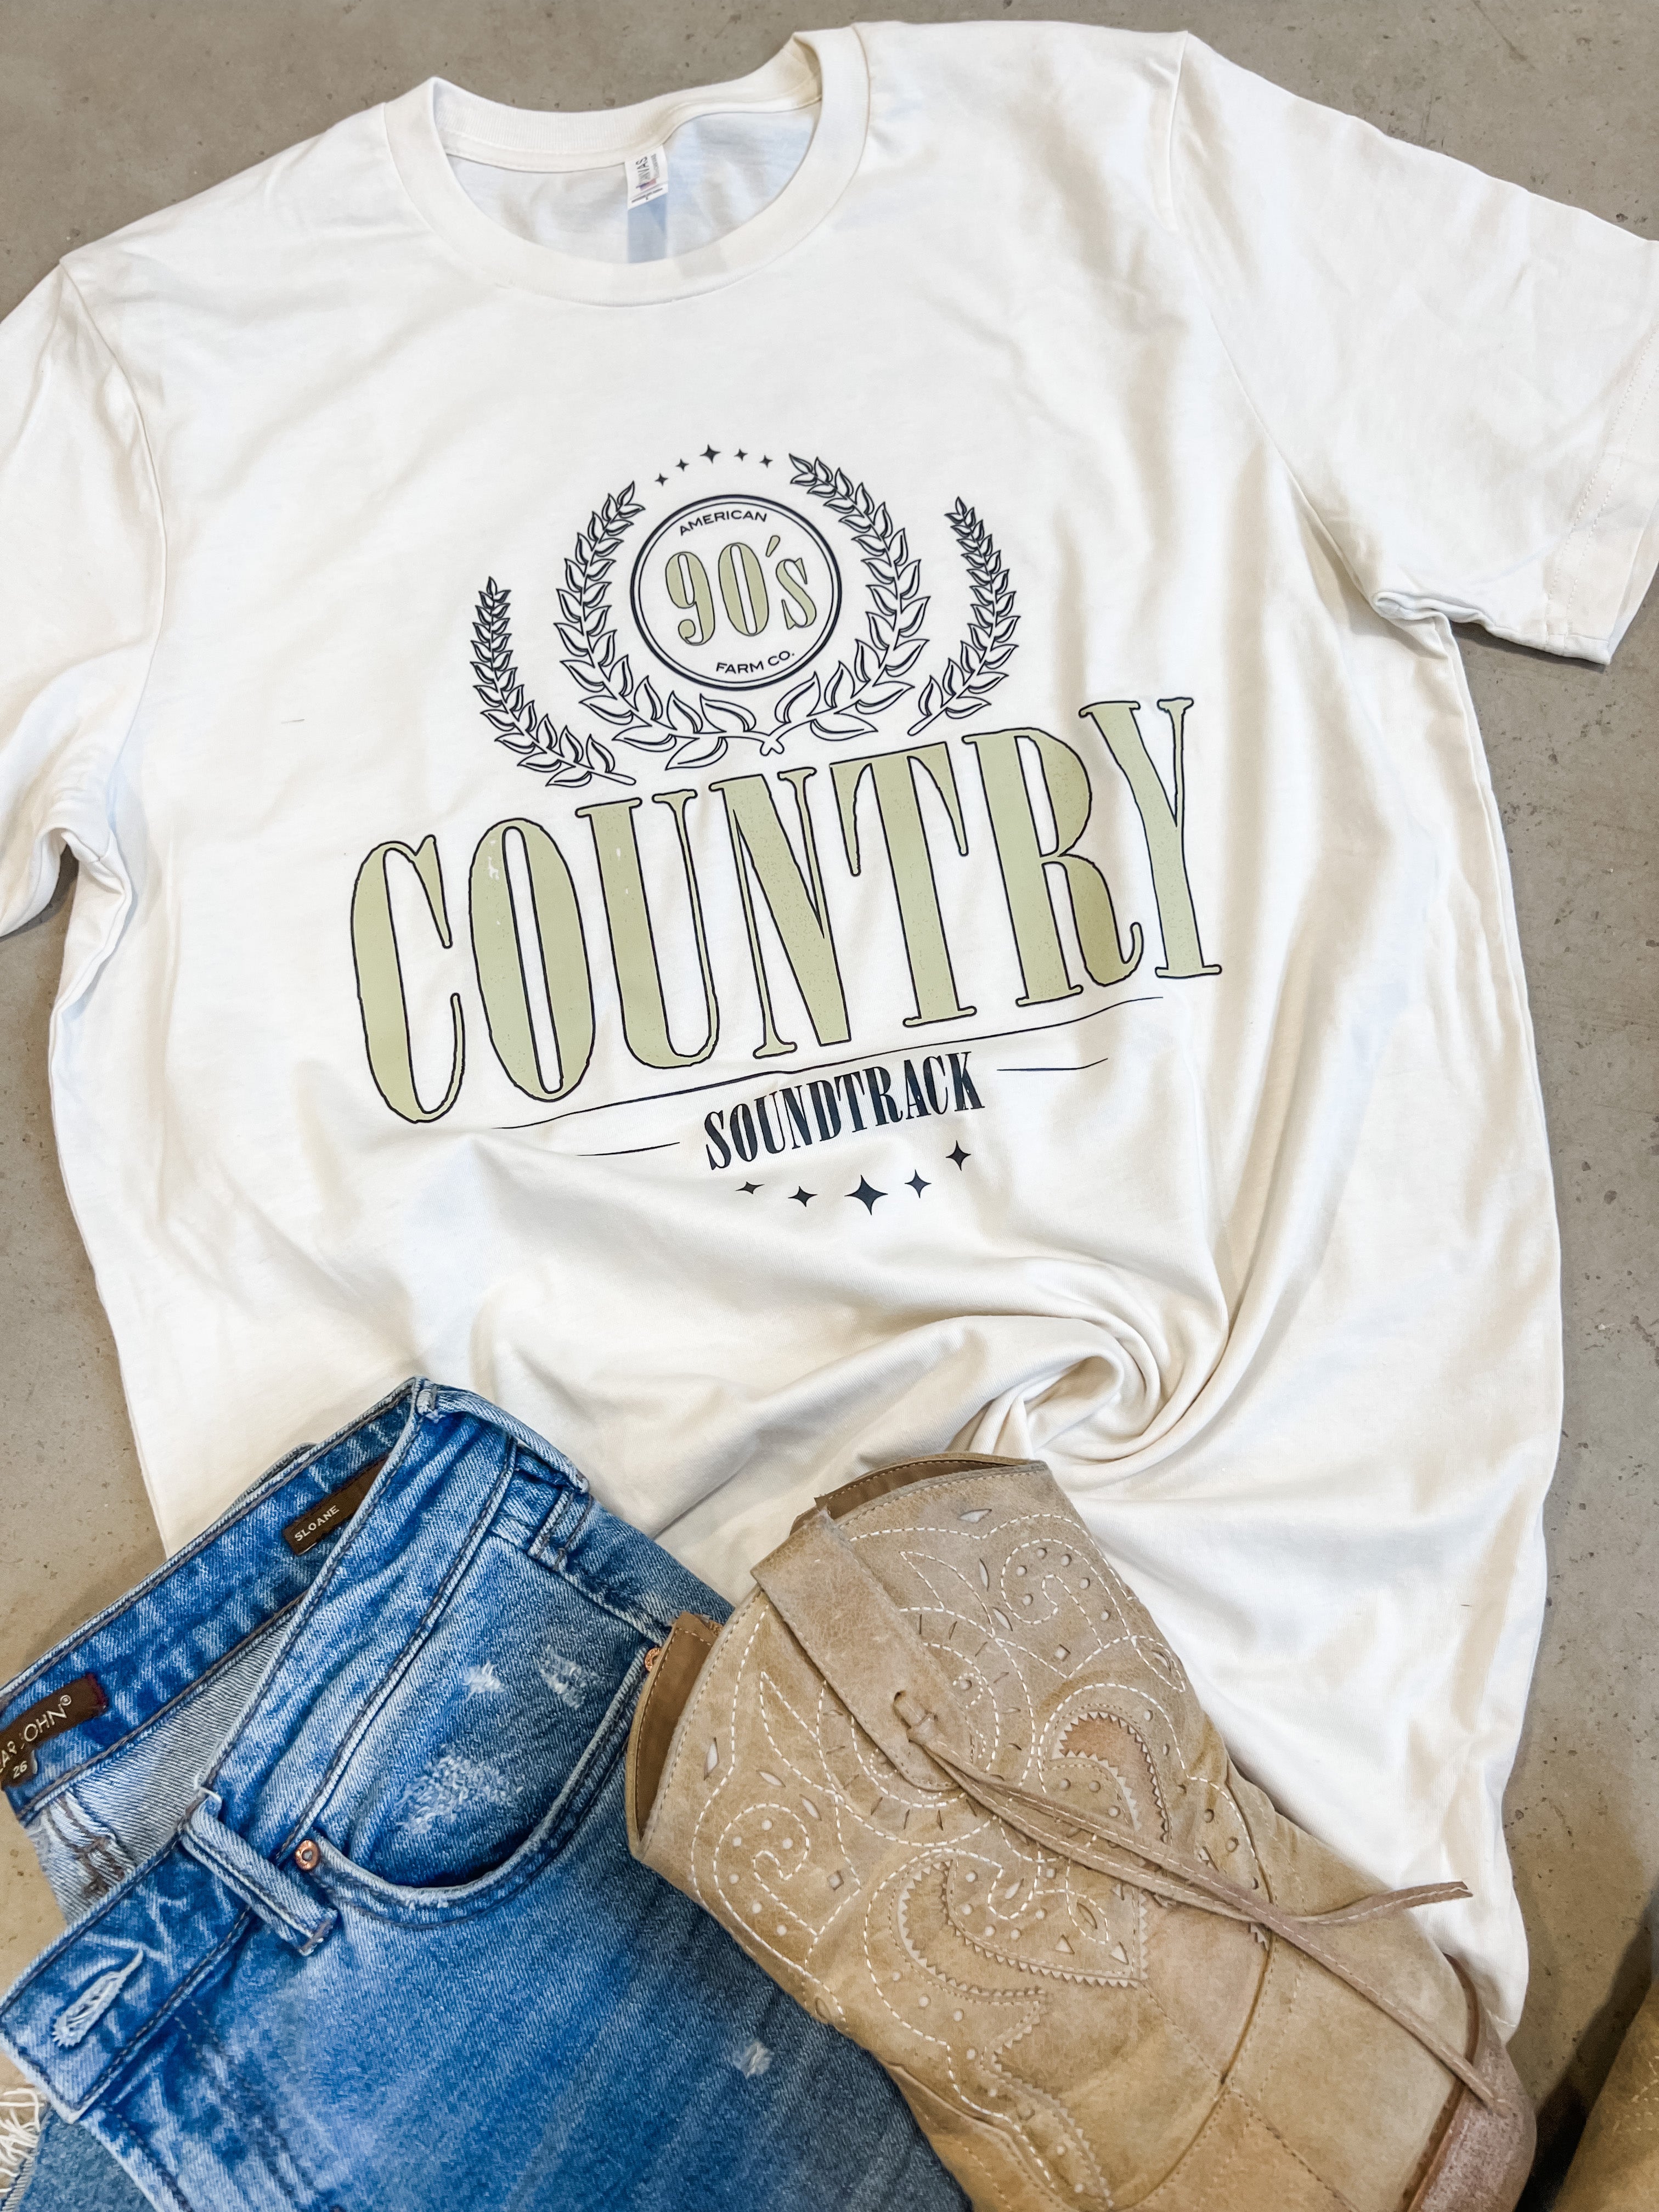 90s Country T-Shirts flat lay with jeans and boots beside